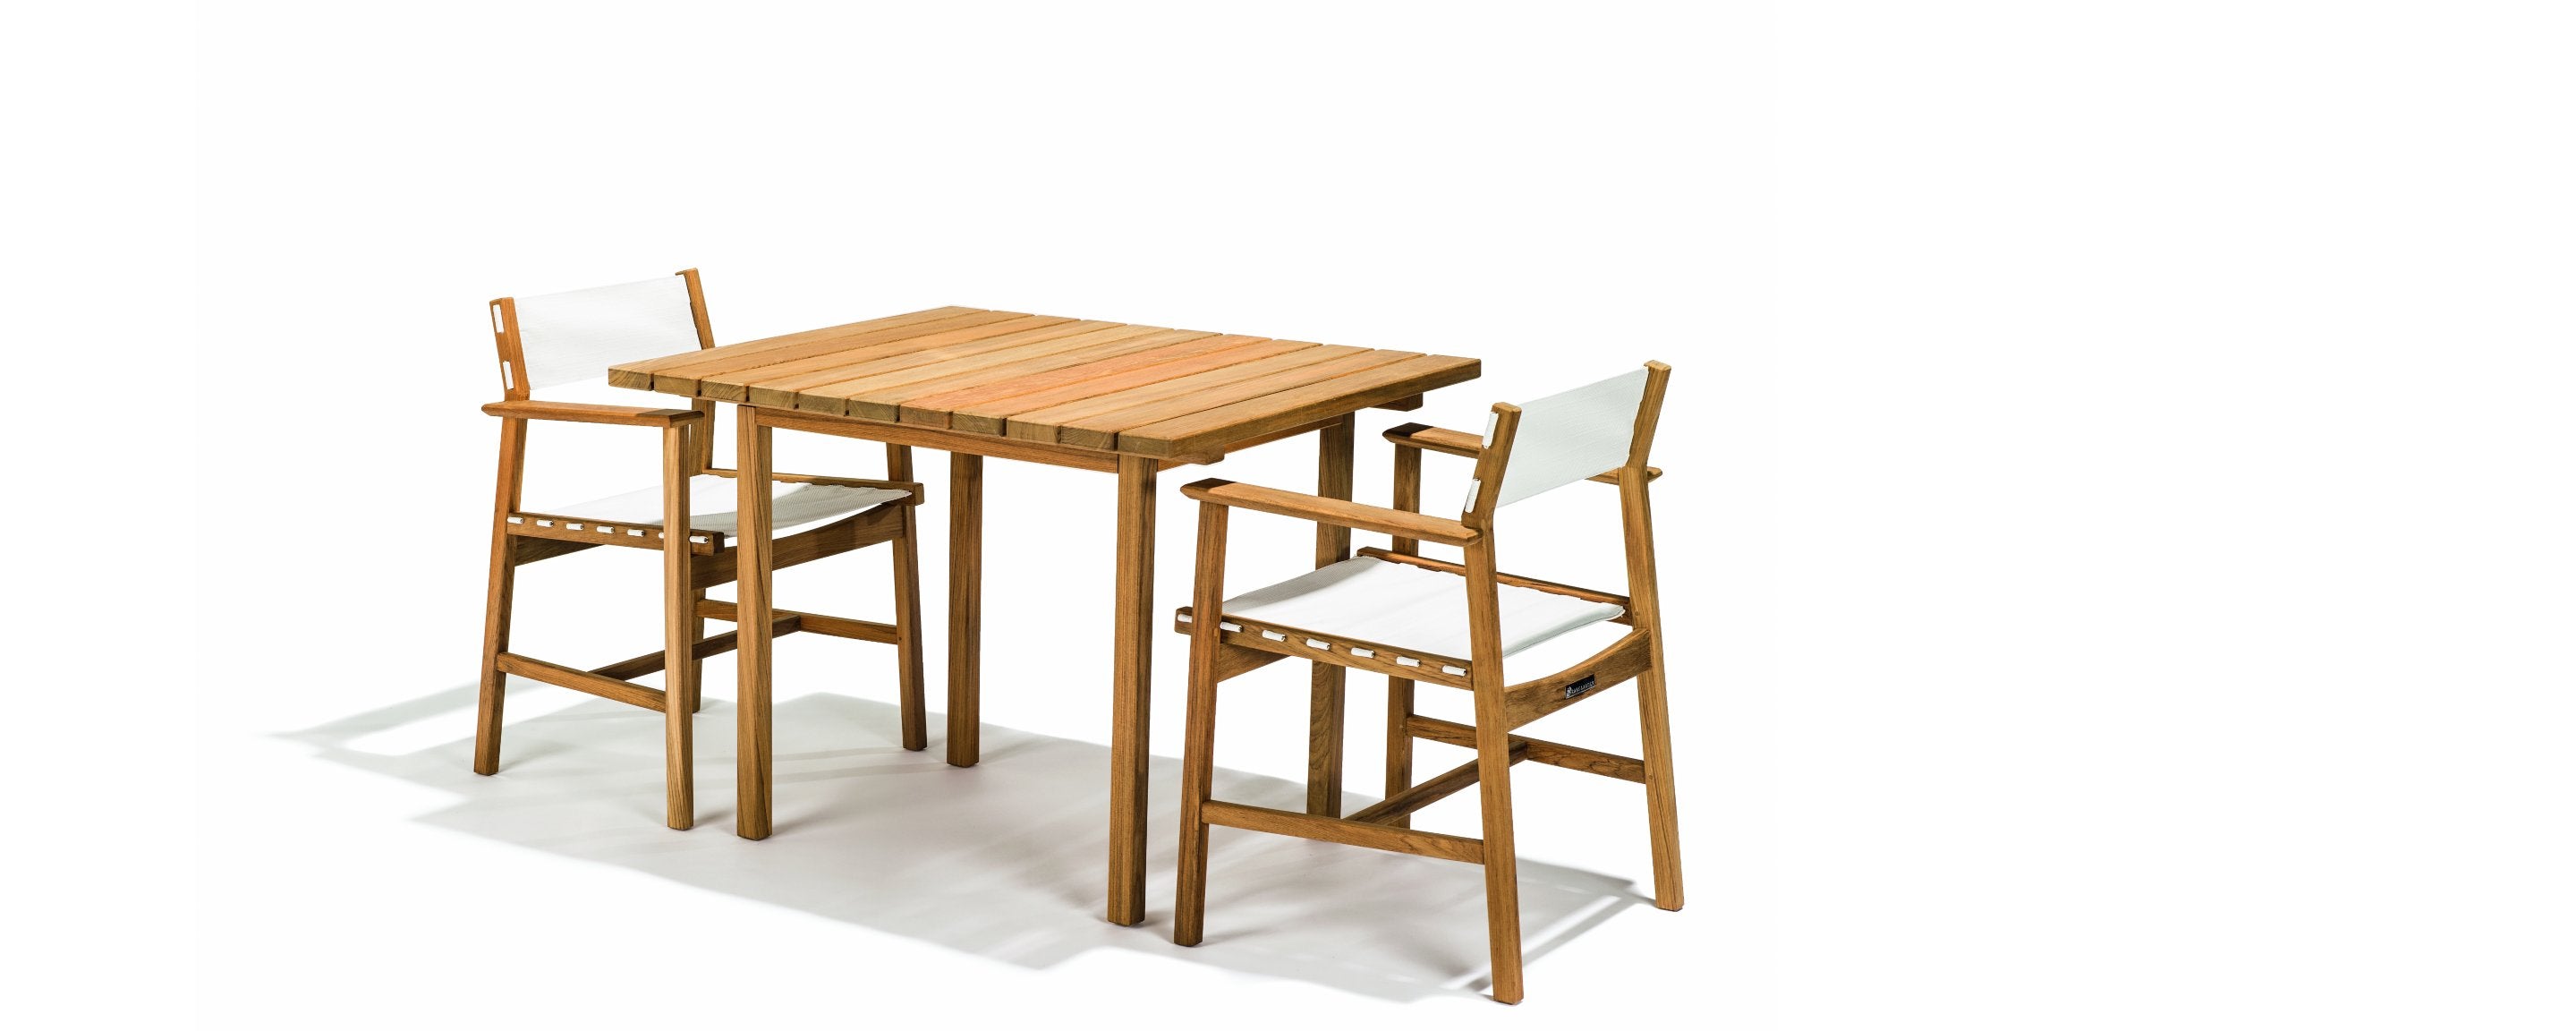 the djuro small dining table